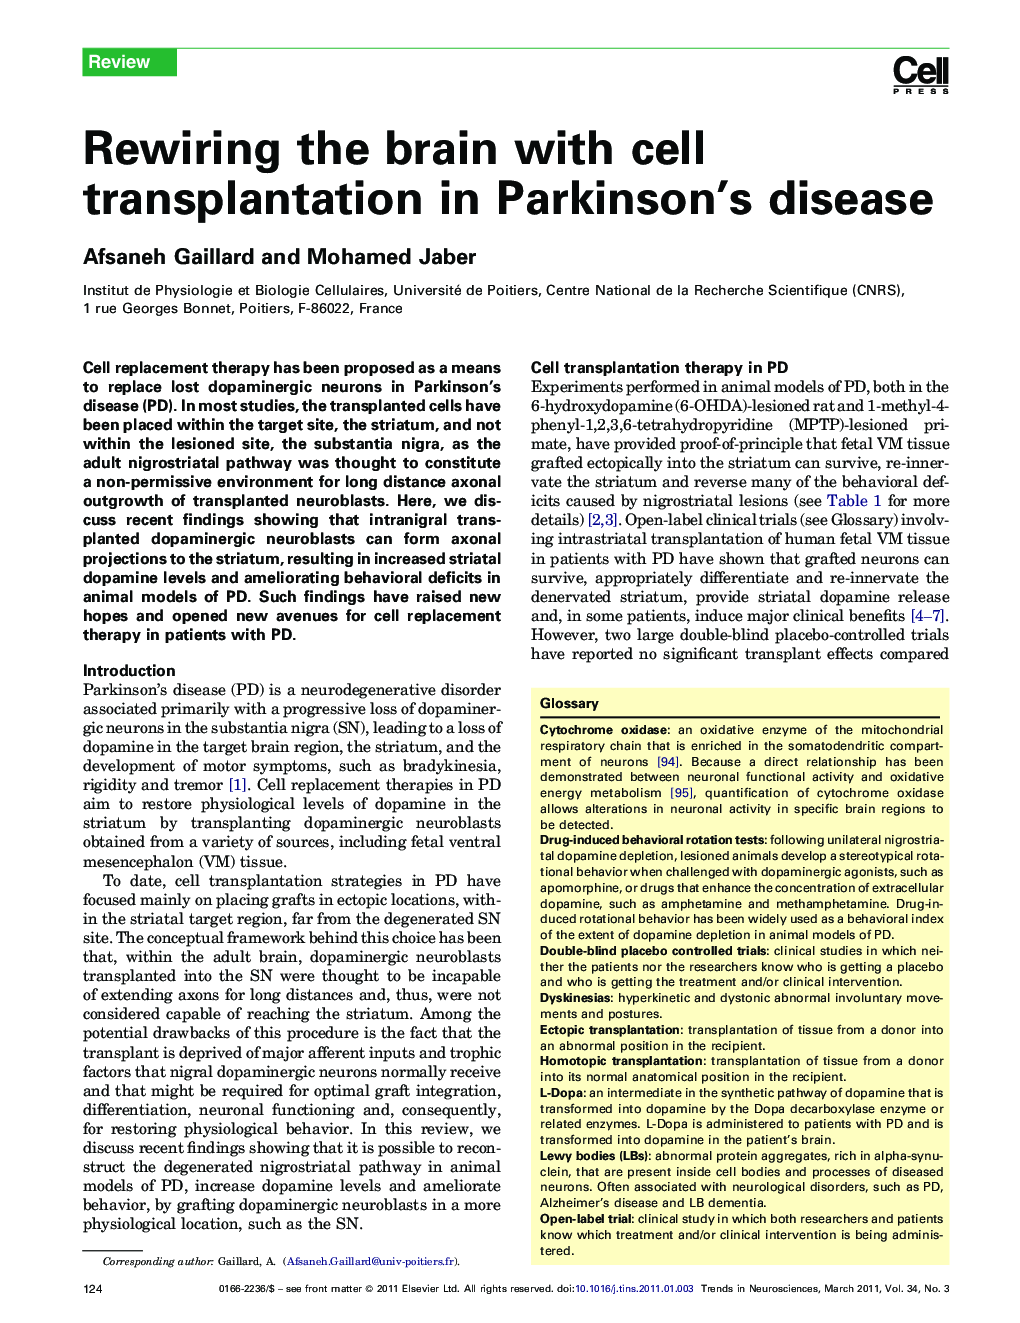 Rewiring the brain with cell transplantation in Parkinson's disease